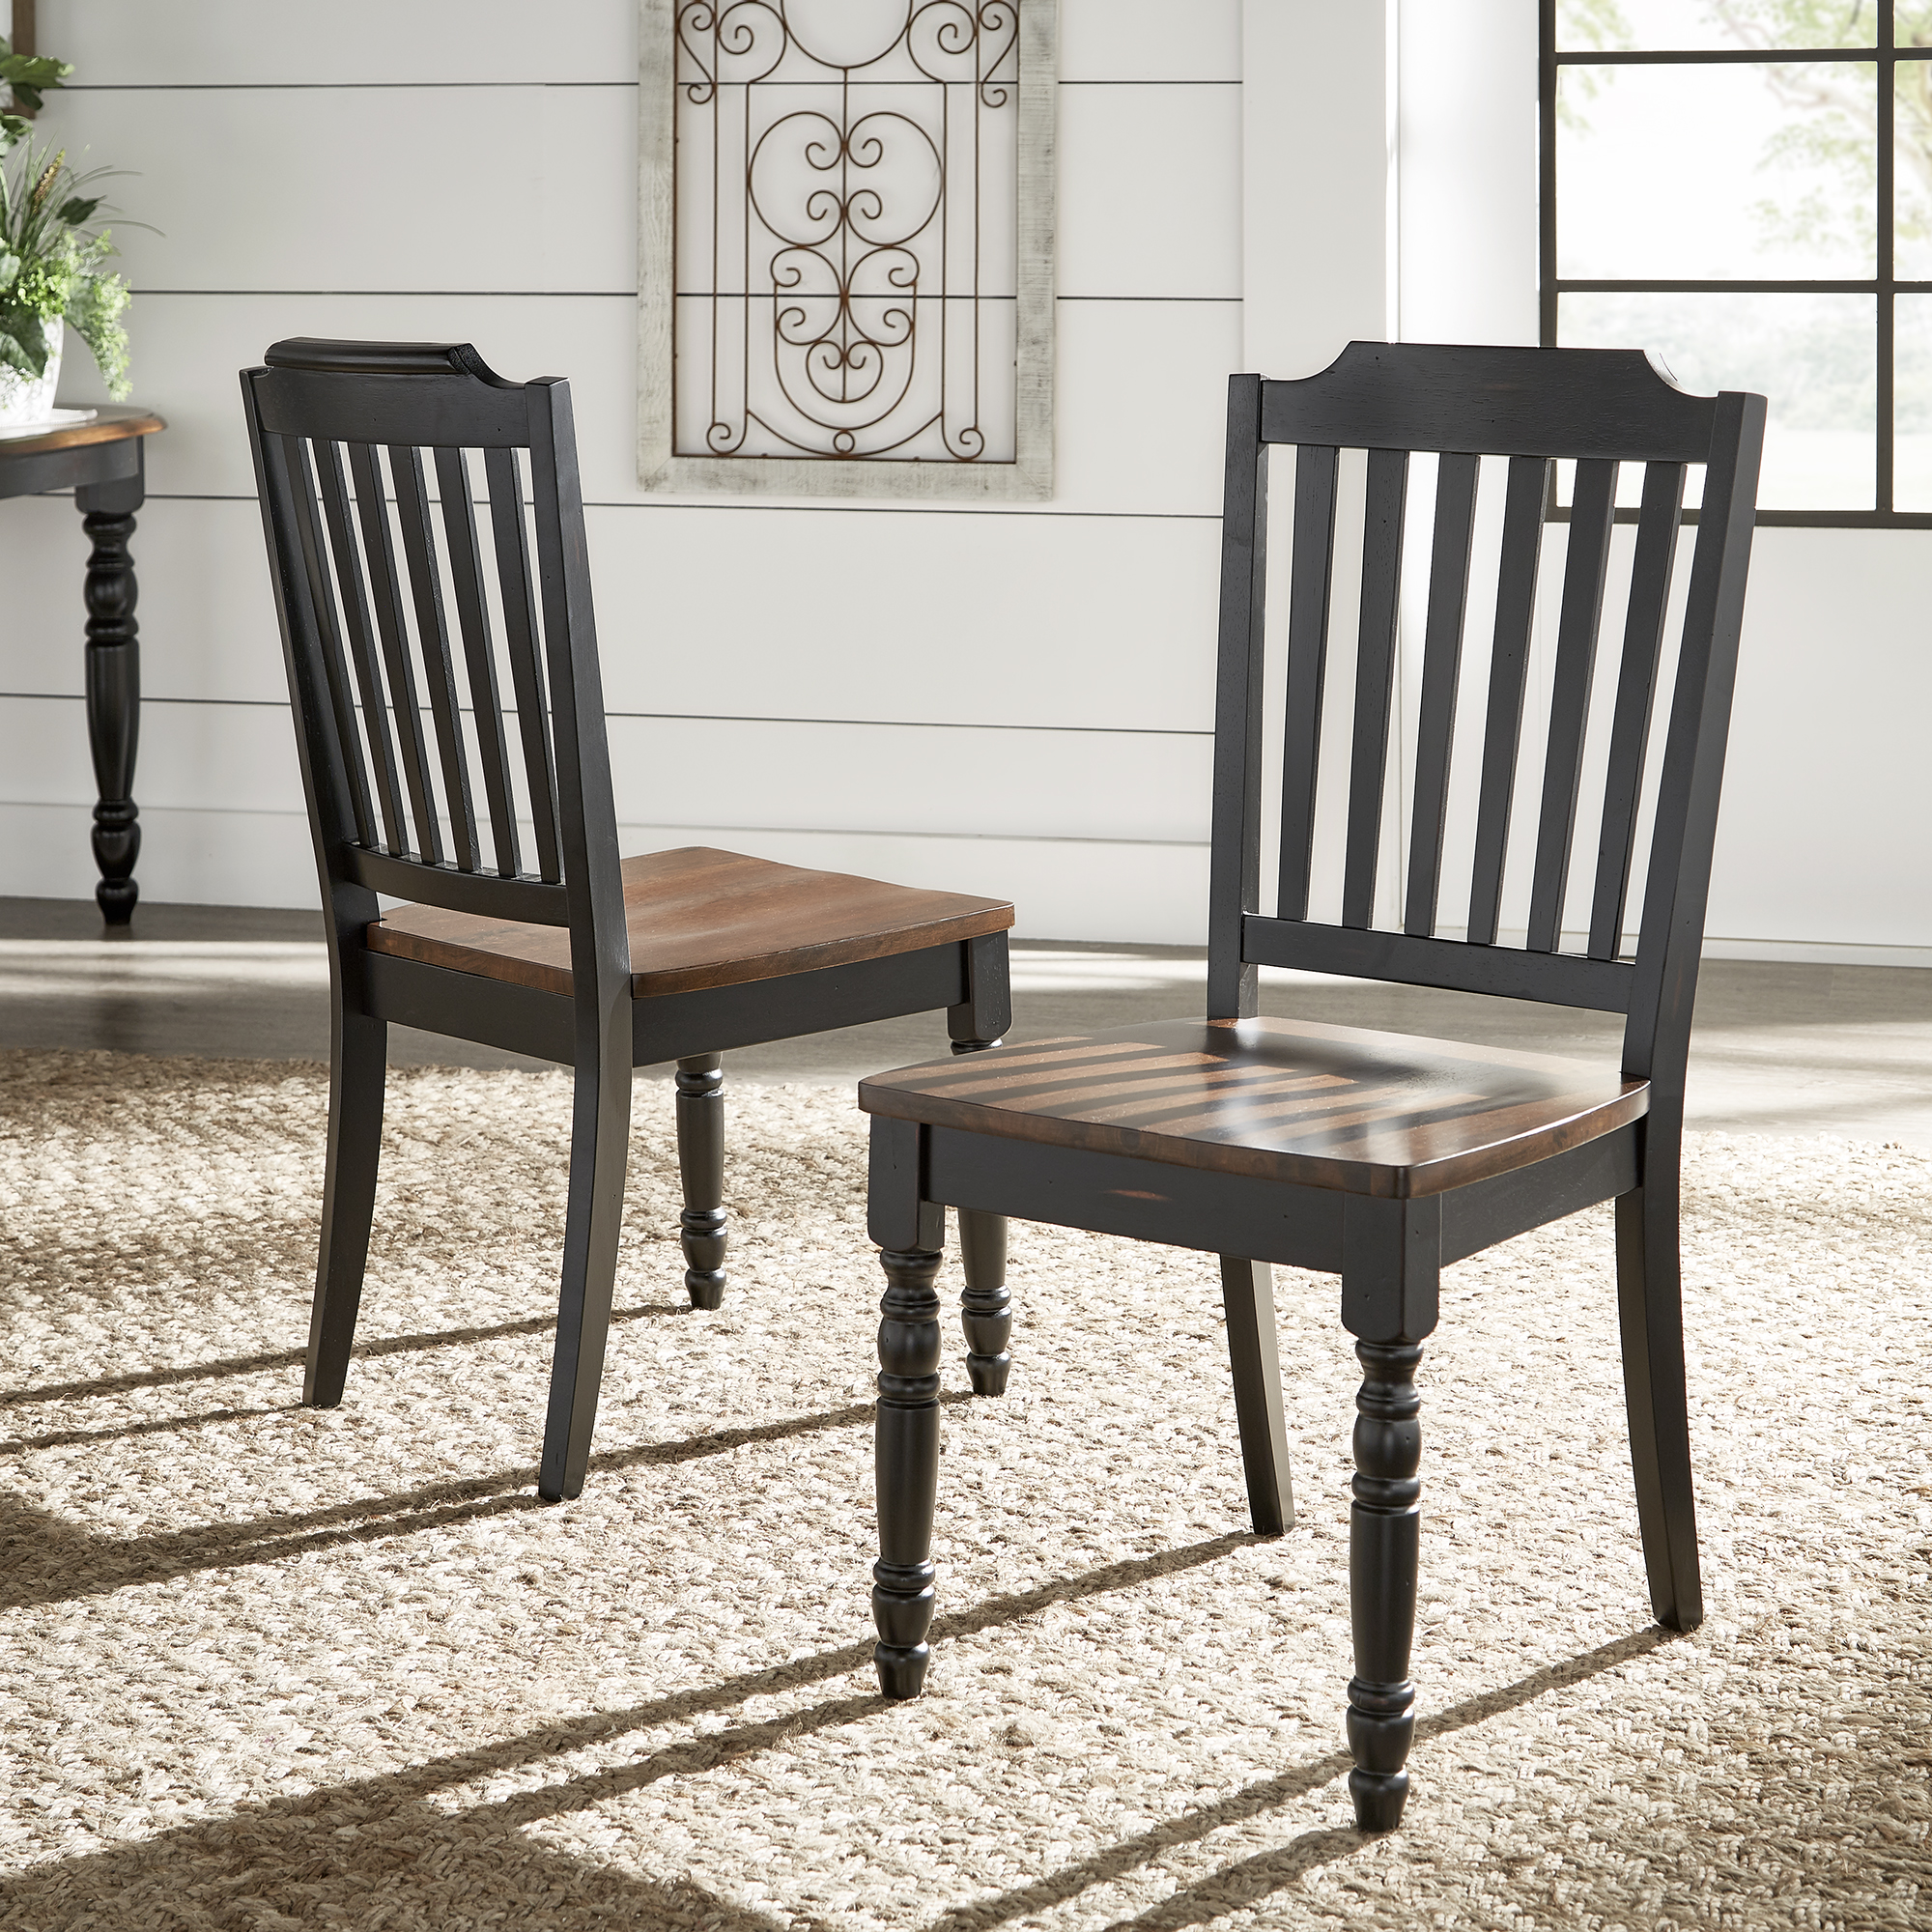 Two-Tone Antique Dining Chairs (Set of 2)